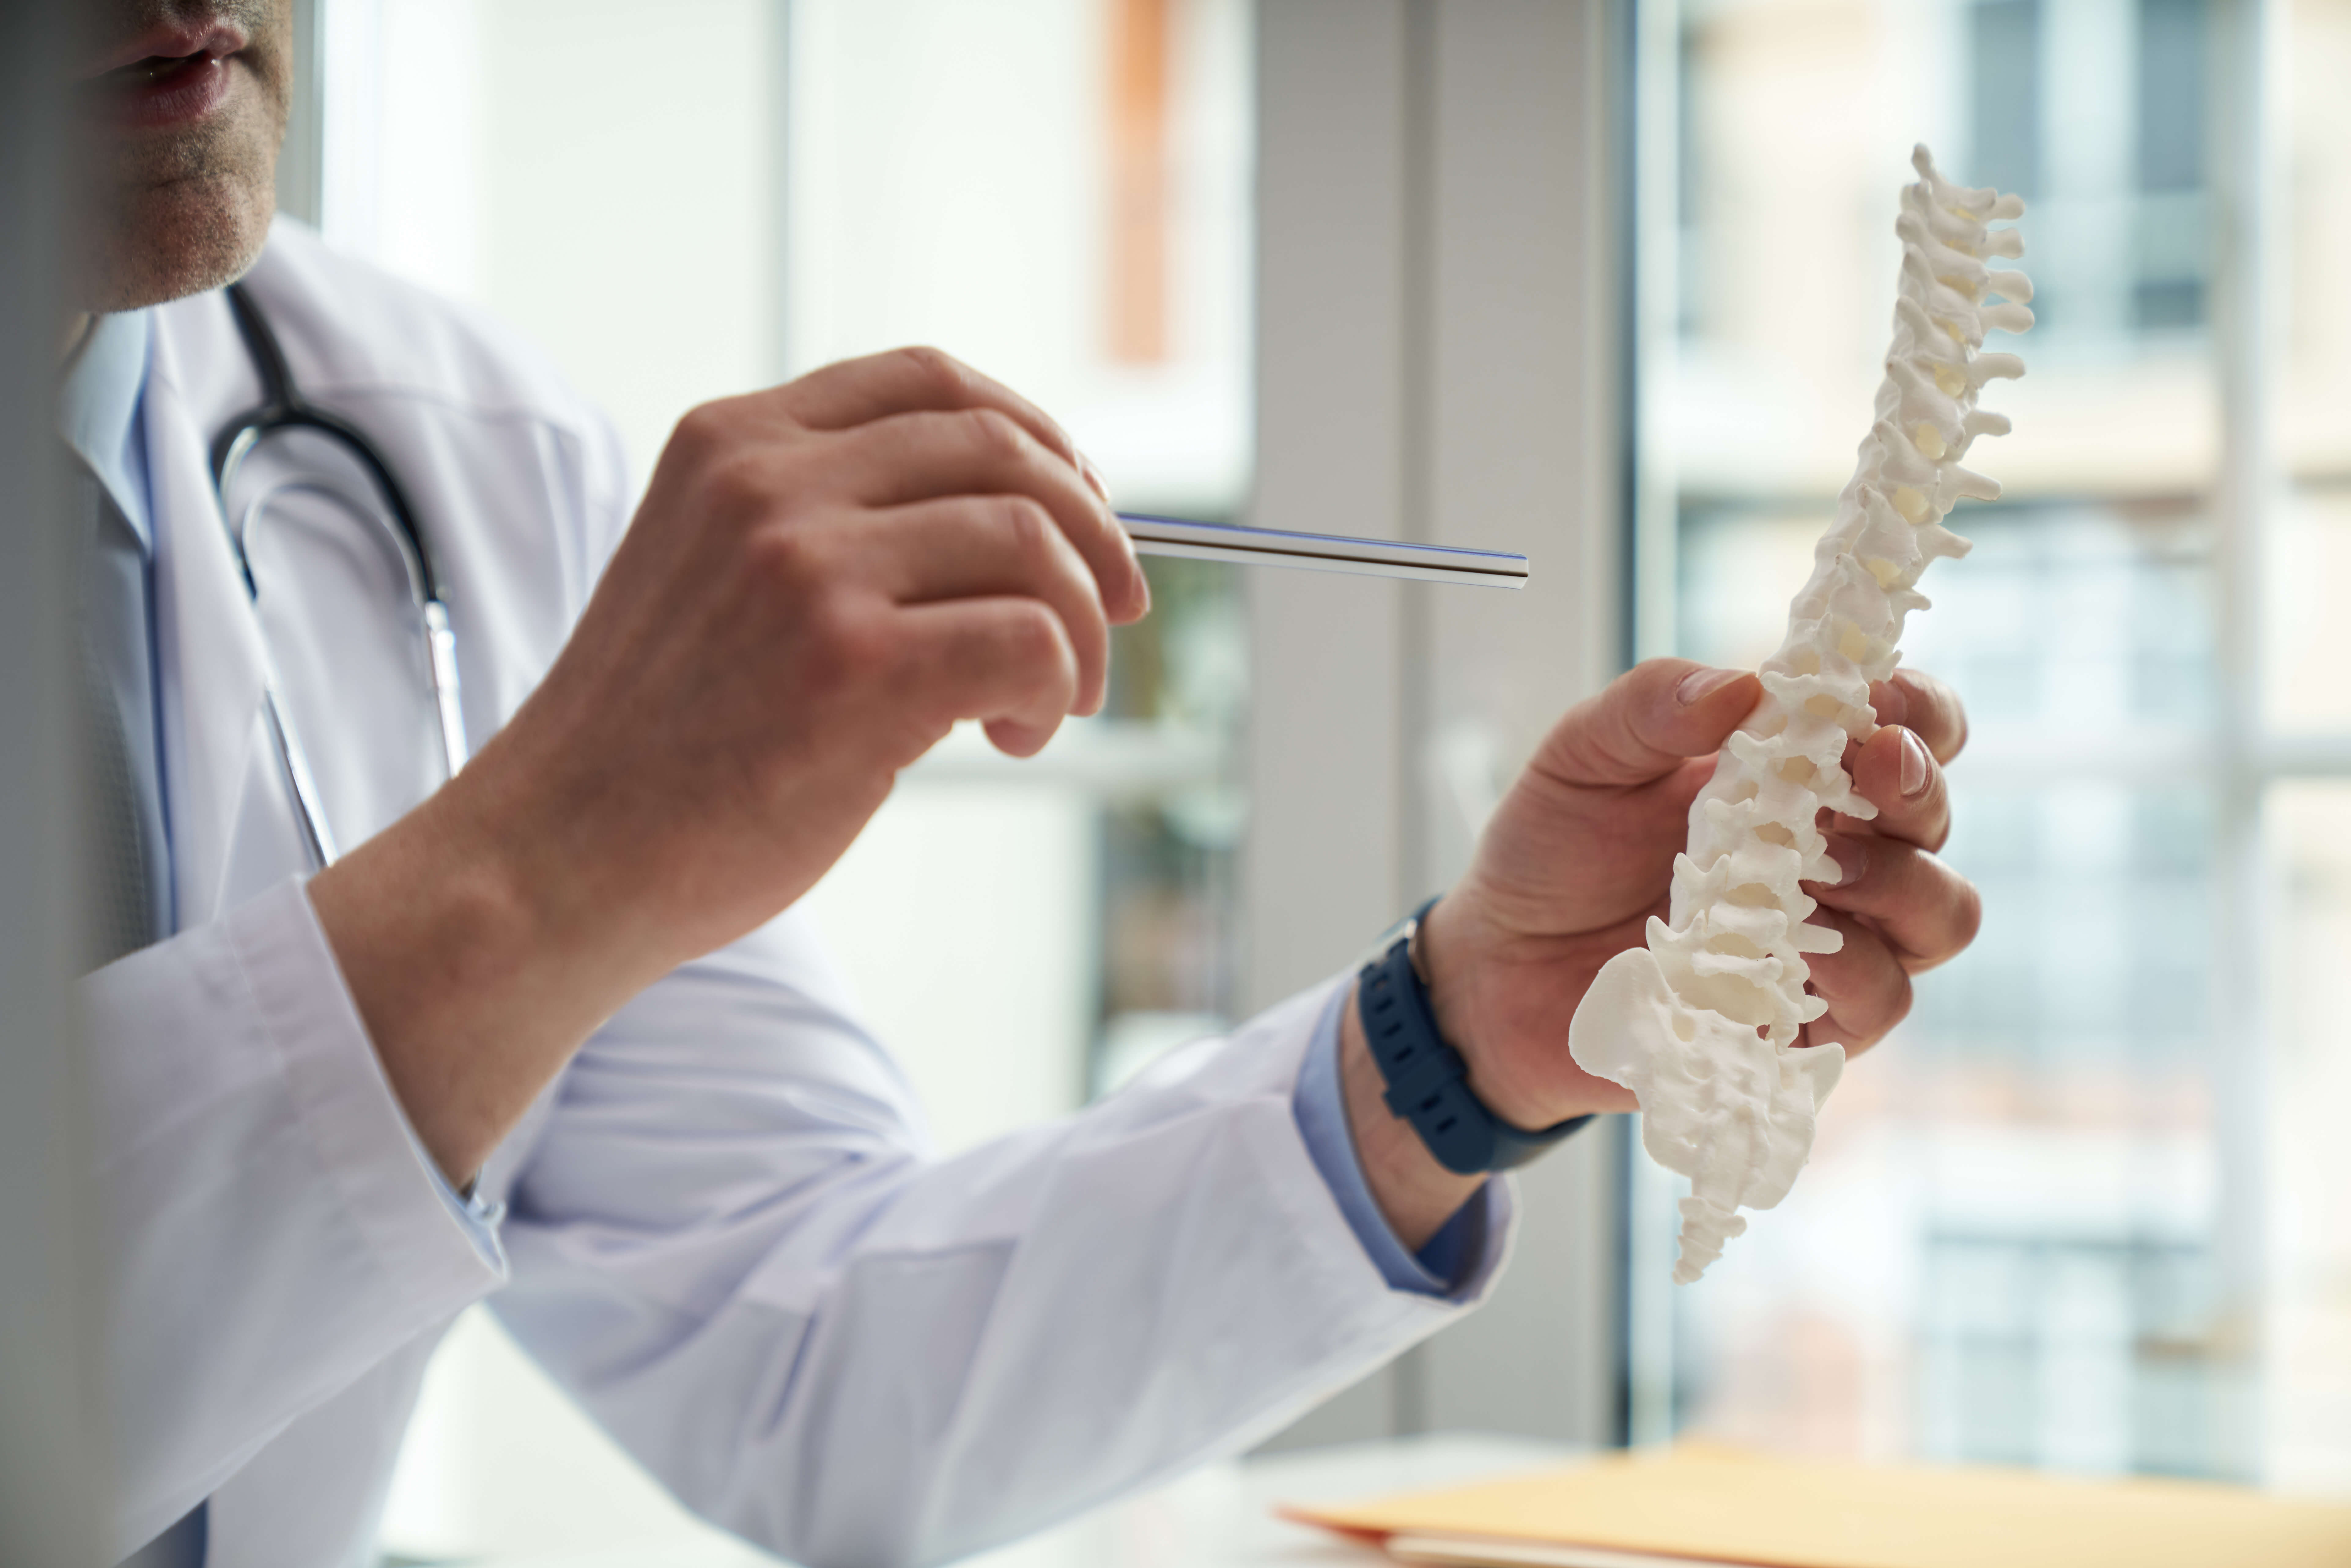 A doctor in a white coat points to a vertebra on a model of a human spine.